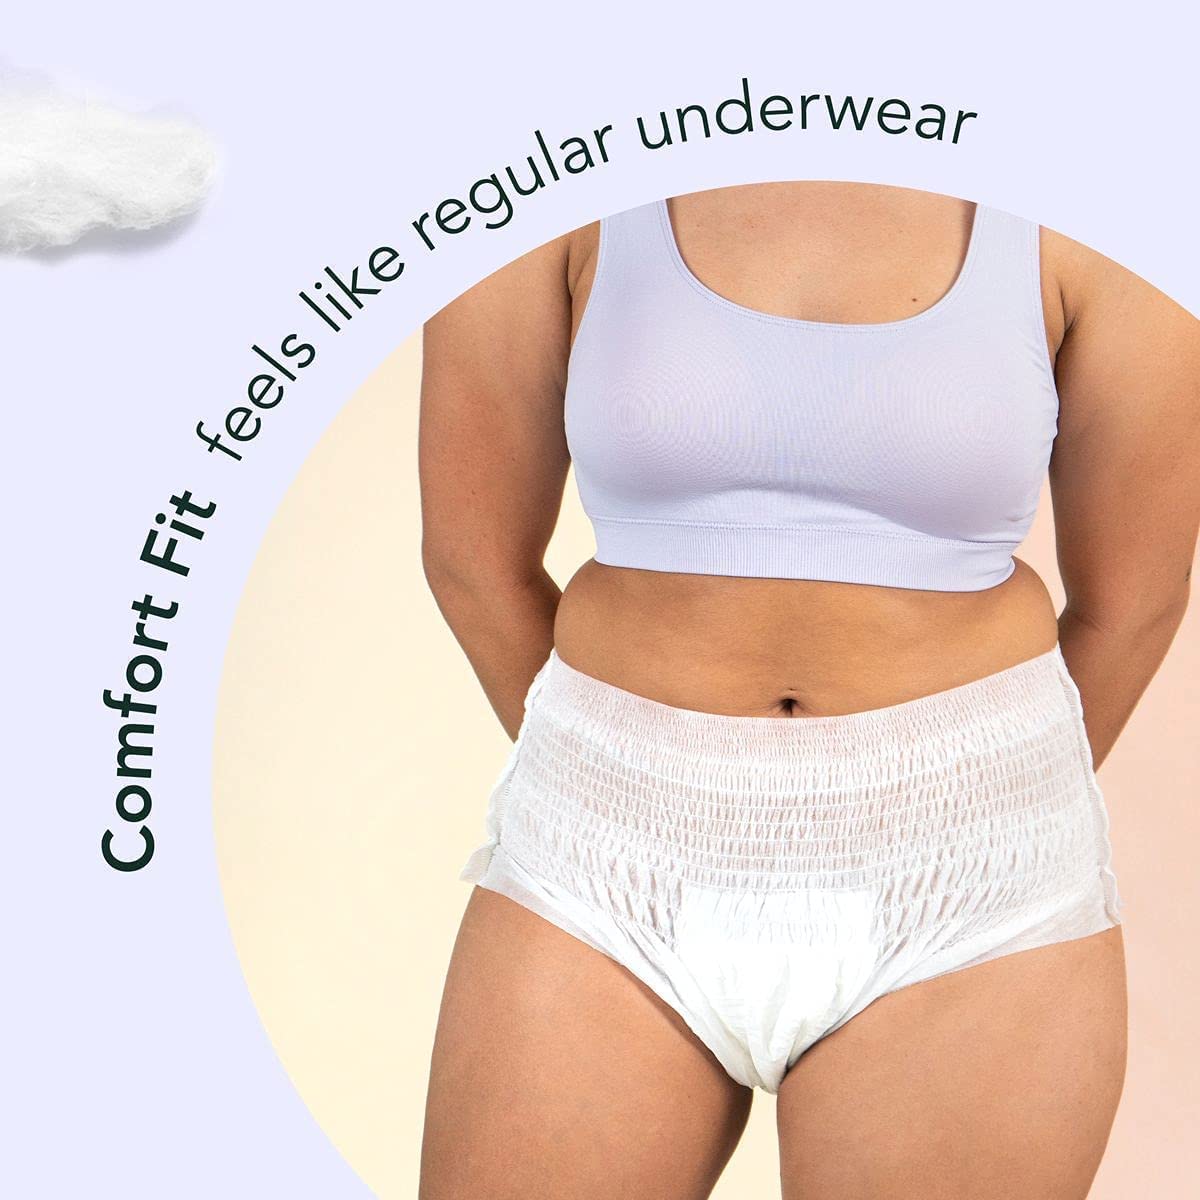 Rael] ORGANIC COTTON COVER DISPOSABLE PERIOD UNDERWEAR 4ct – LADY K HOUSE